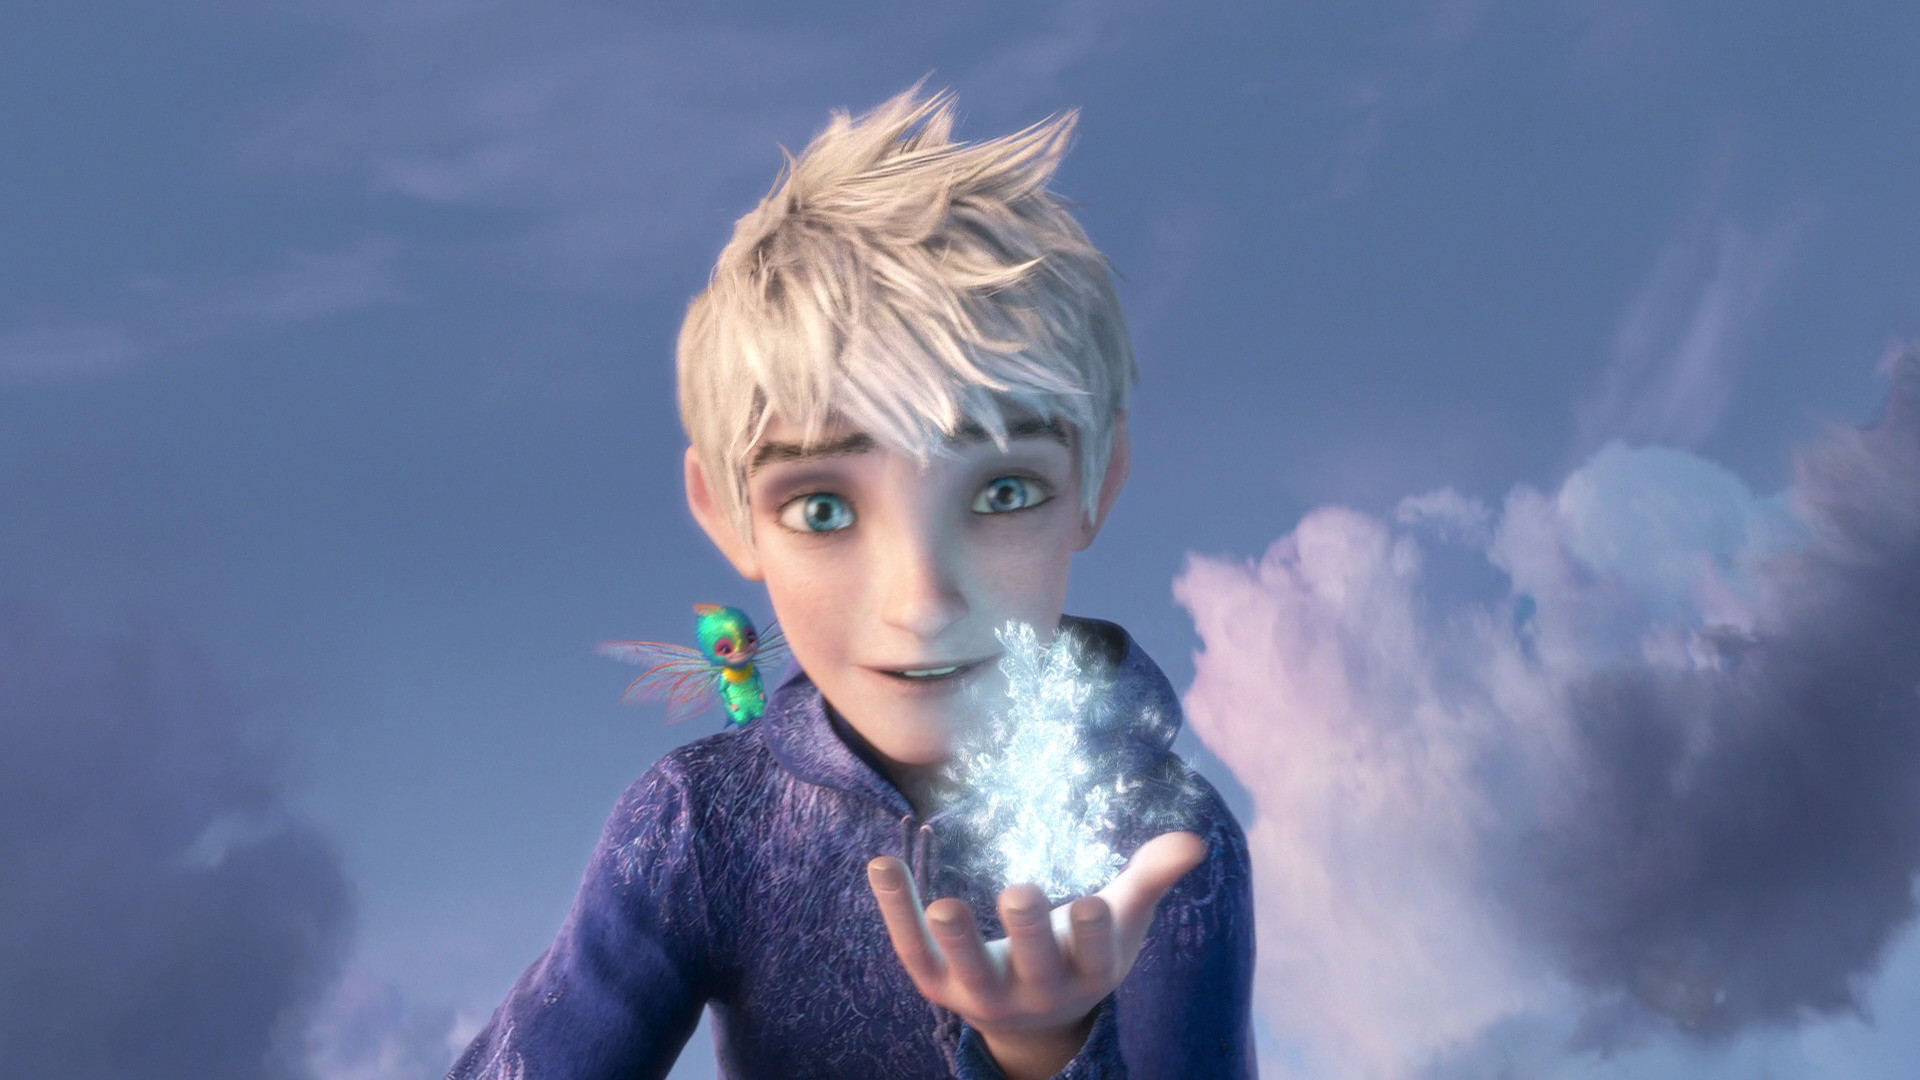 jack frost wallpaper,sky,water,blond,photography,cool